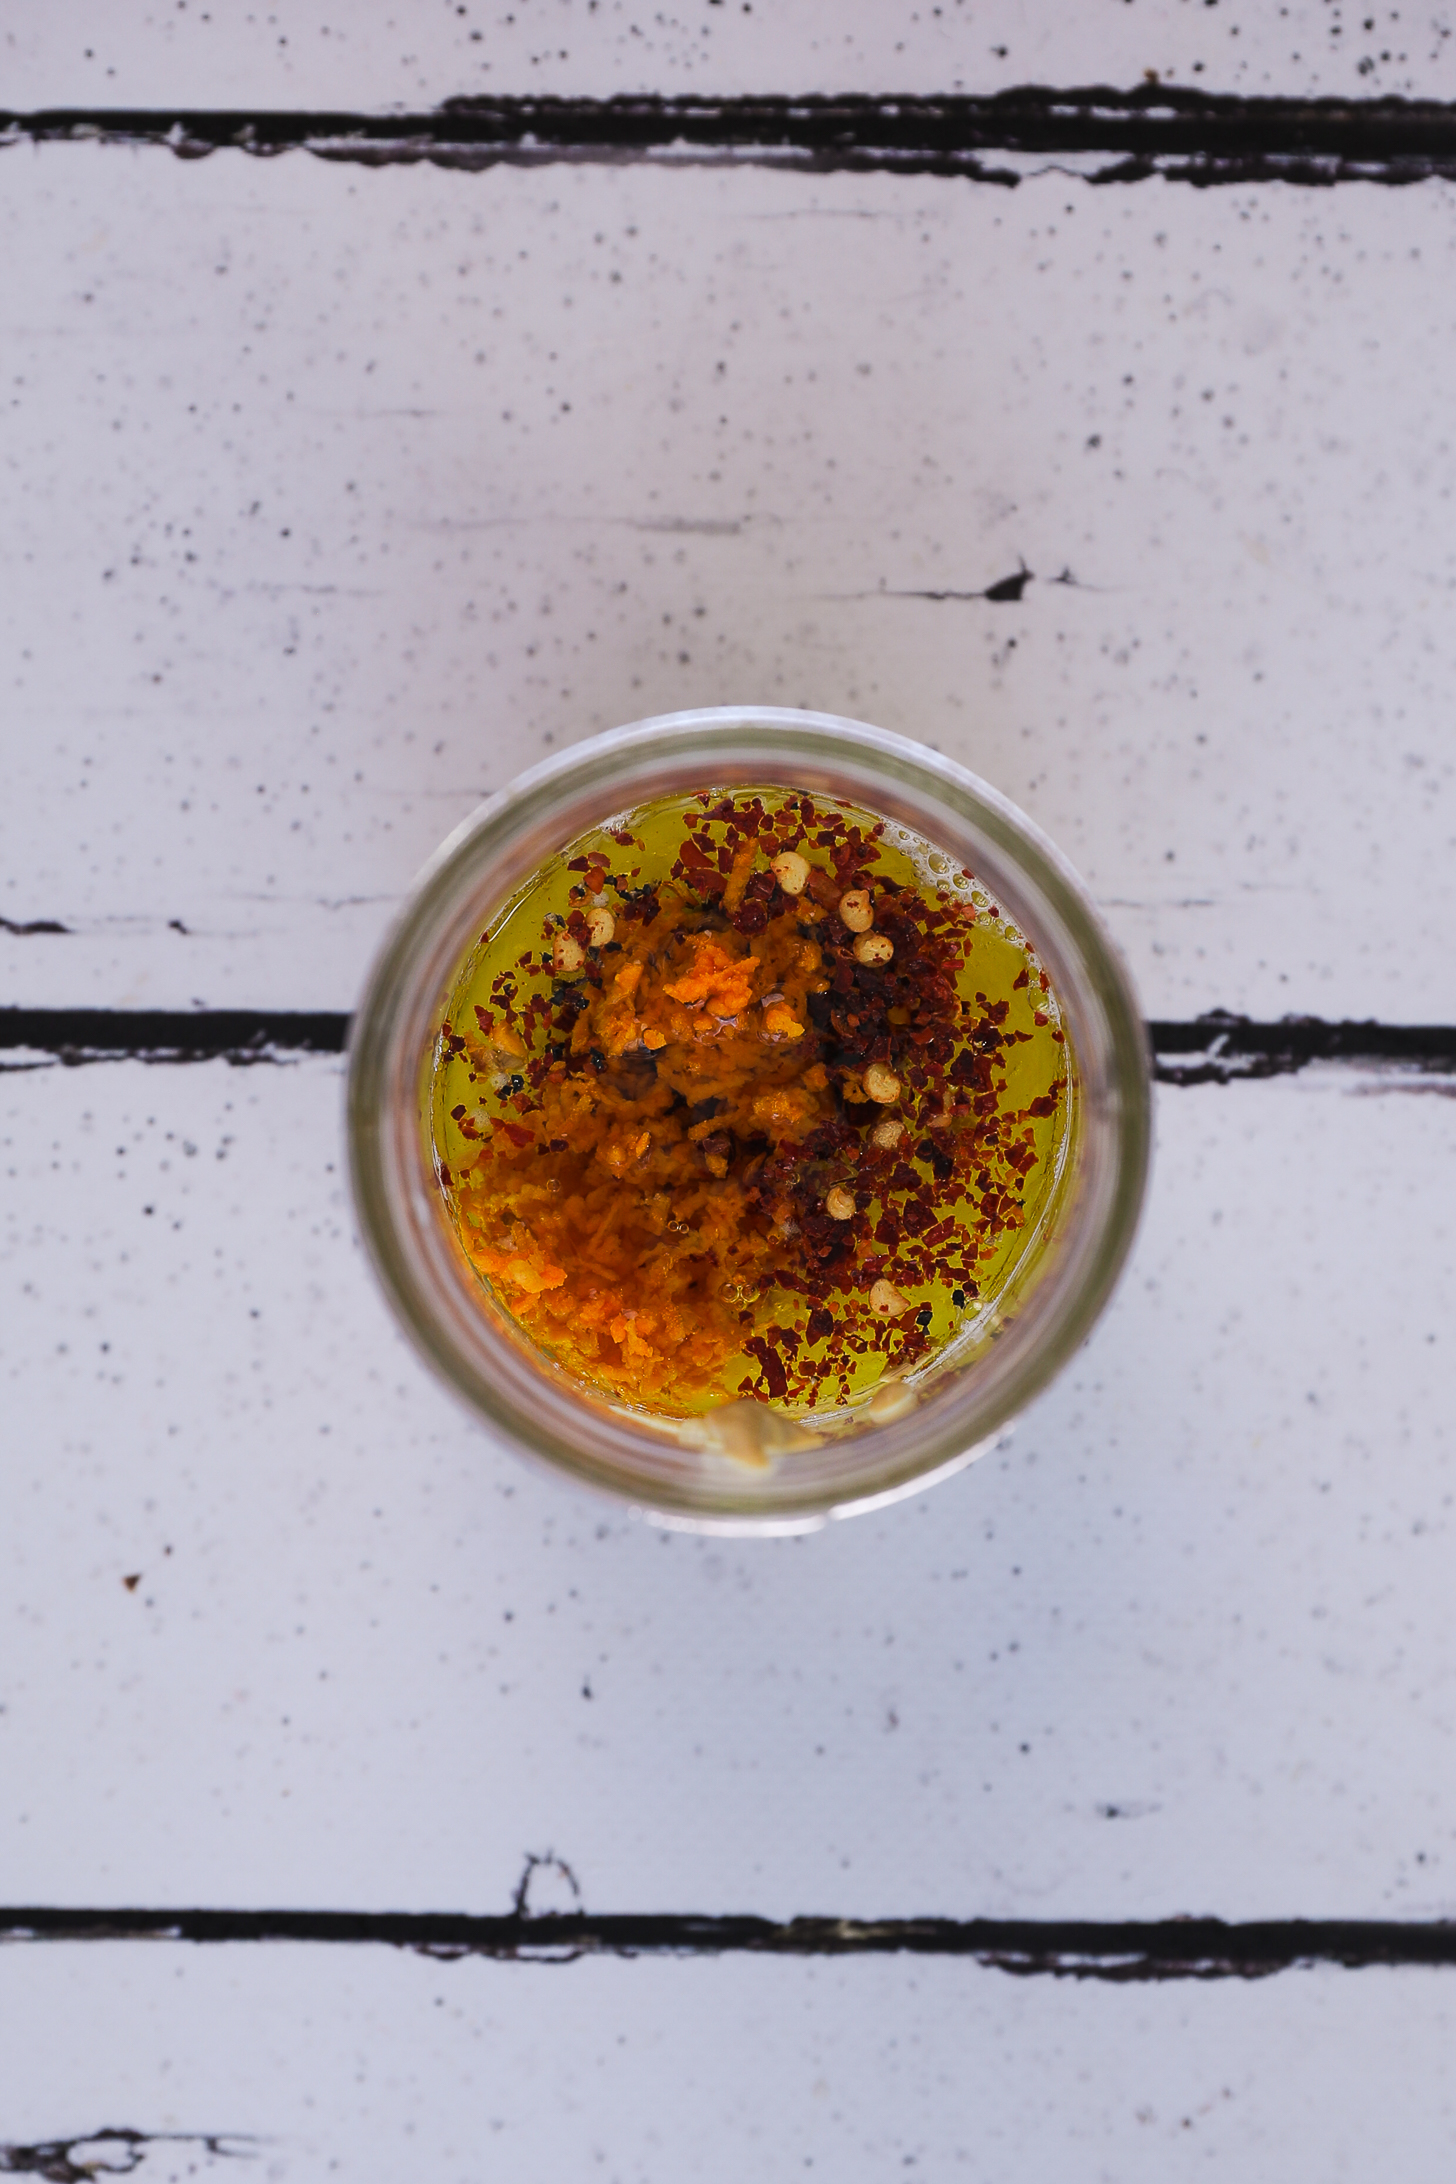 Top down view of an open mason jar showing lemon and oil topped with chilli flakes and grated fresh turmeric.